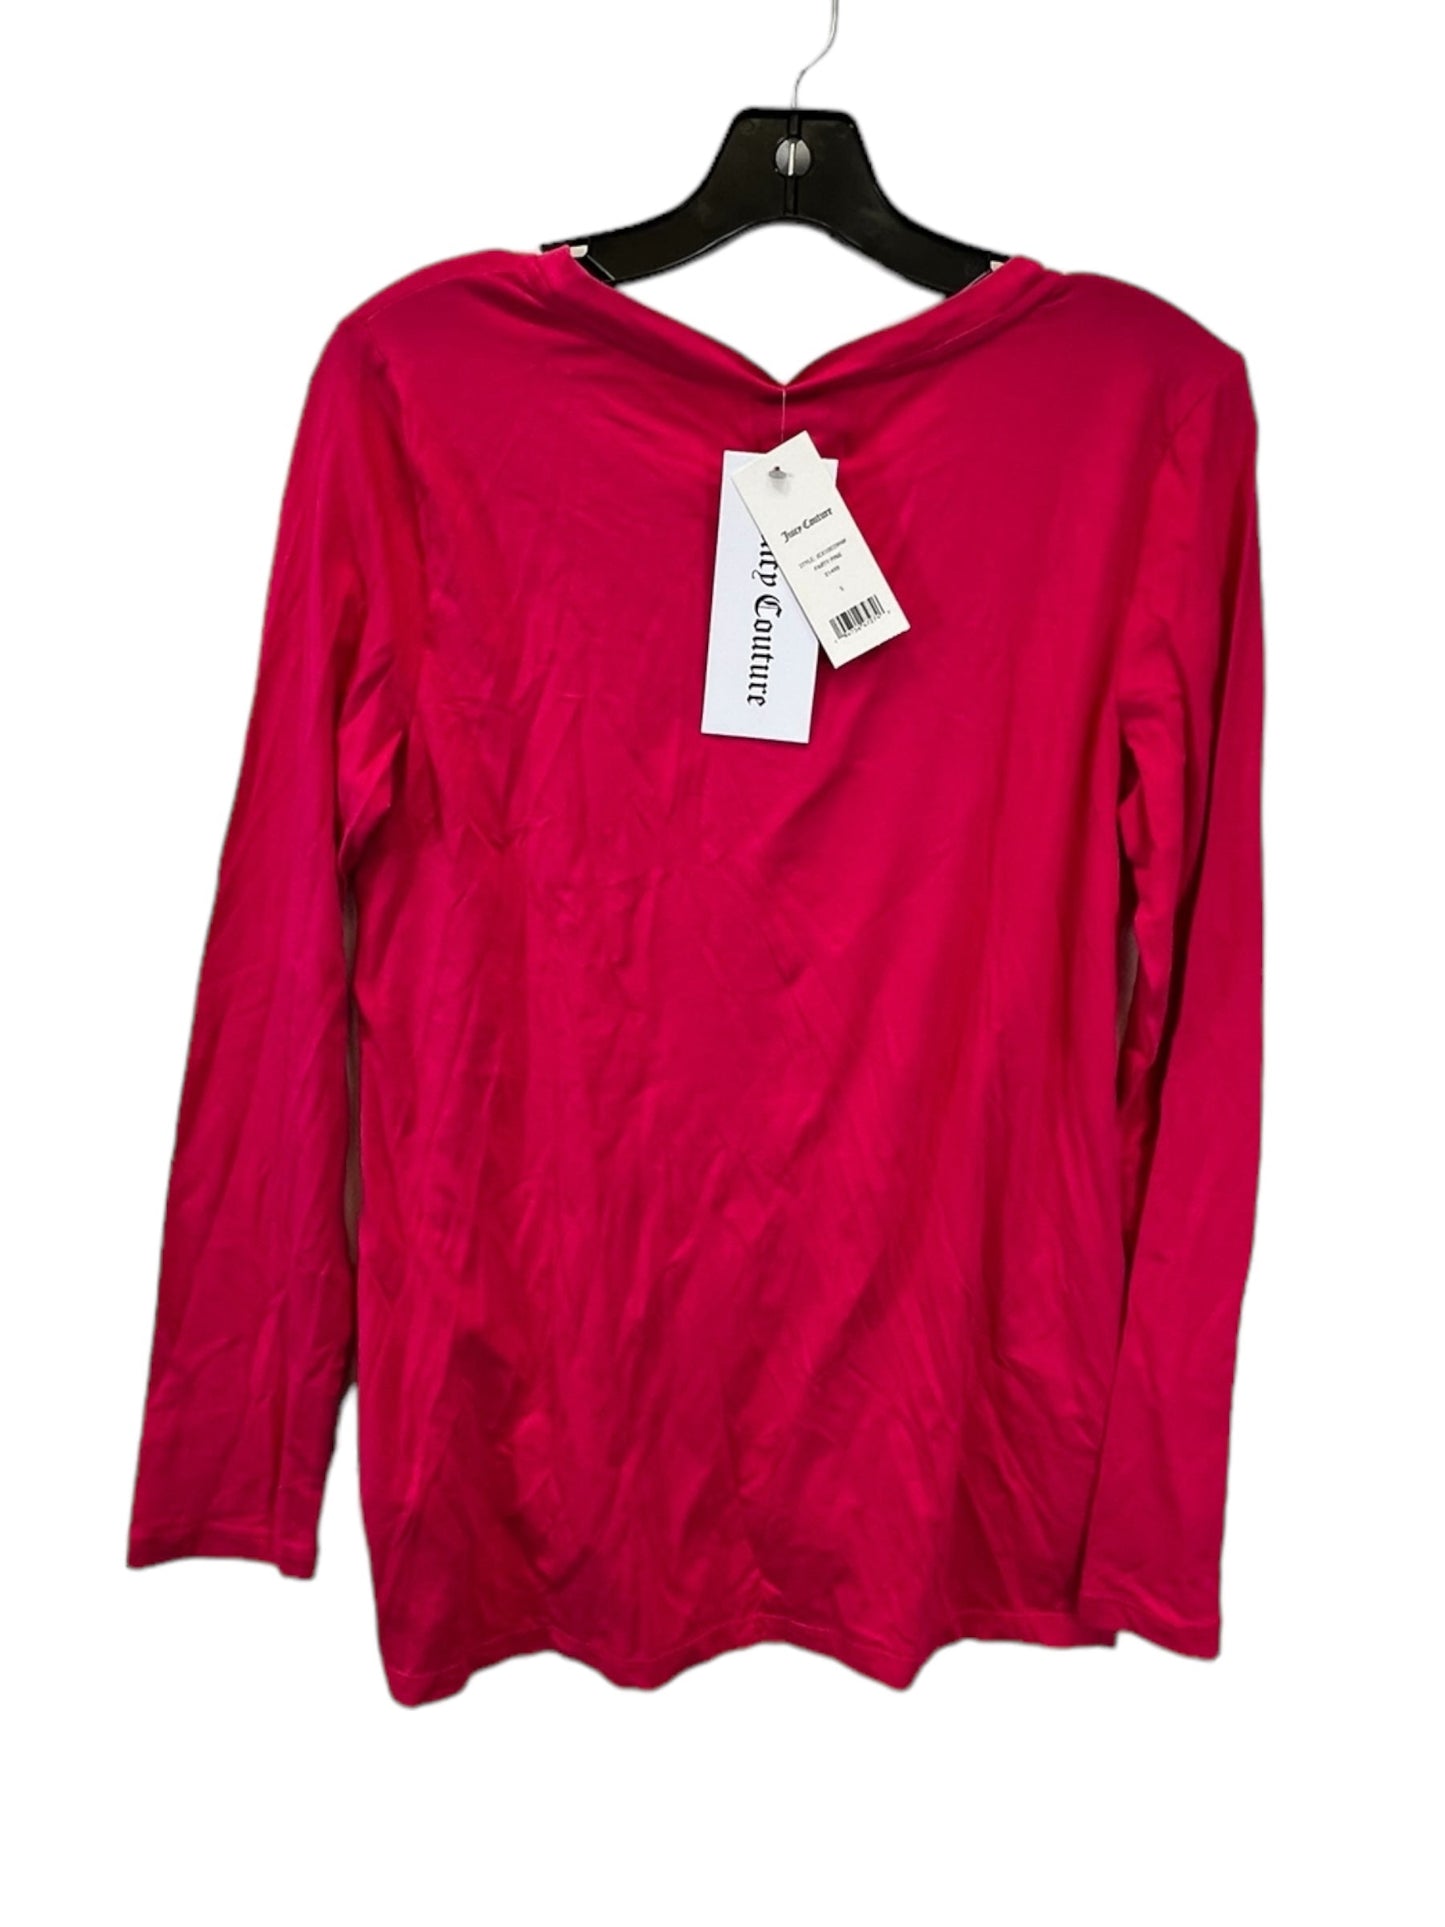 Pink Top Long Sleeve Juicy Couture, Size S